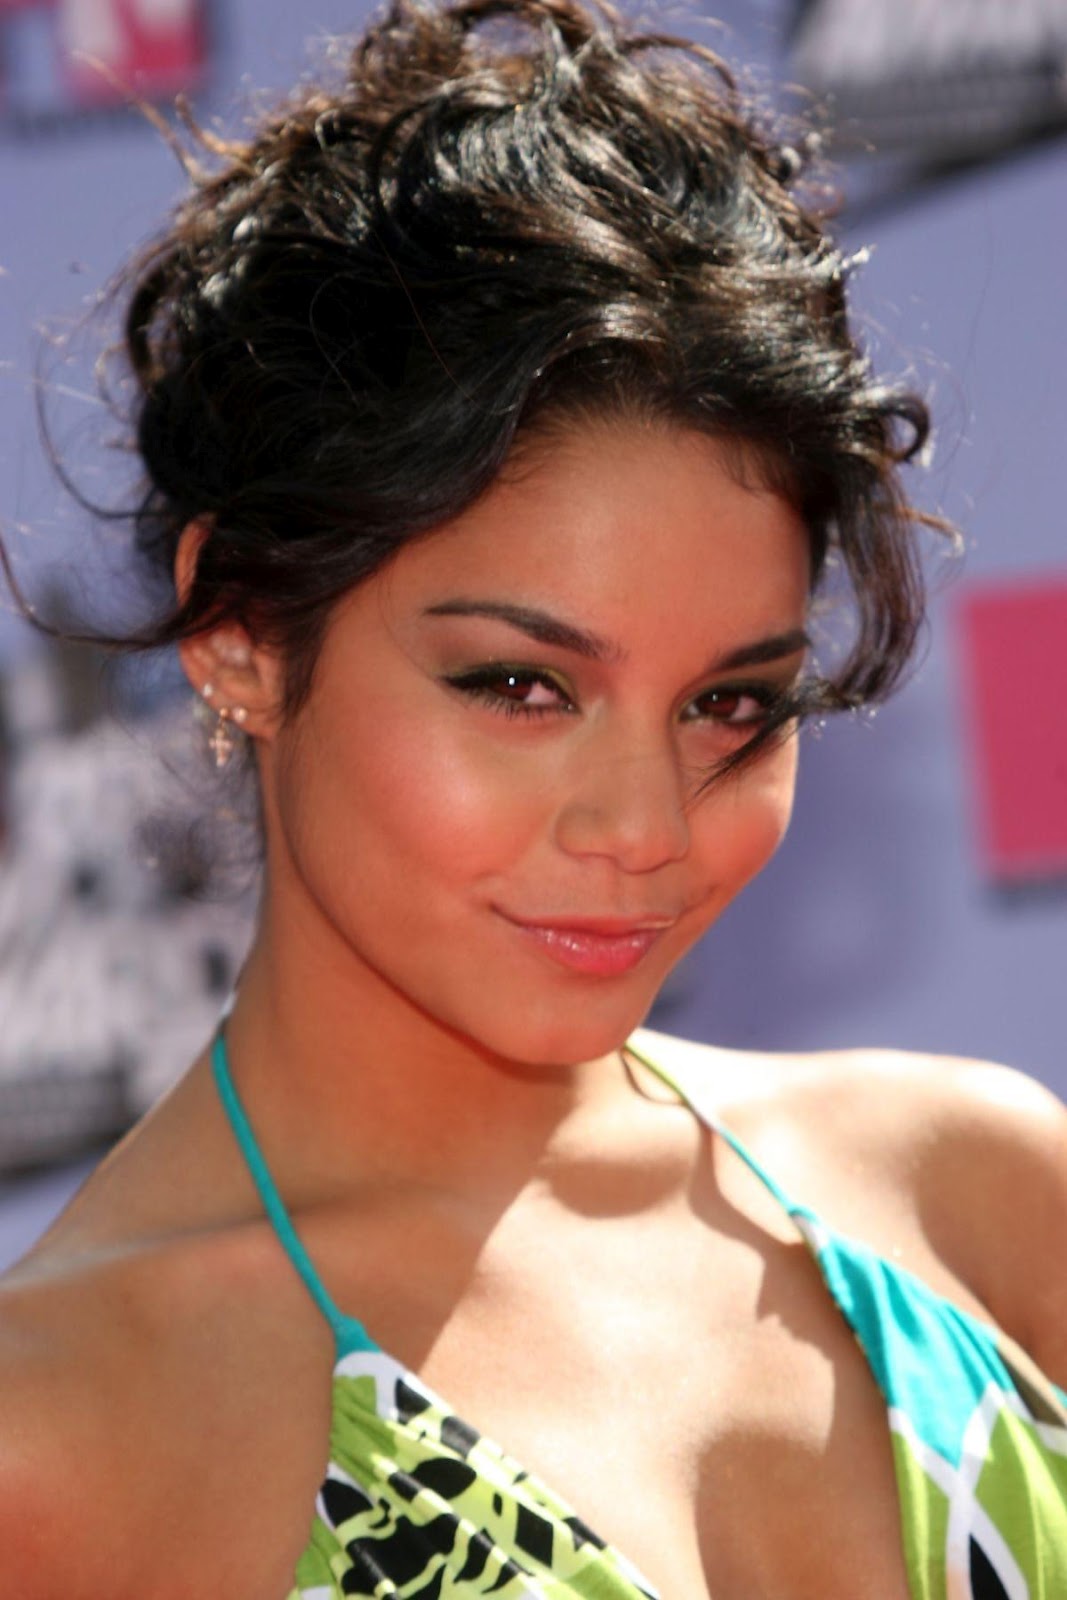 HOLLYWOOD ALL STARS: Vanessa Hudgens Profile, Bio and Pictures/ Wallpapers